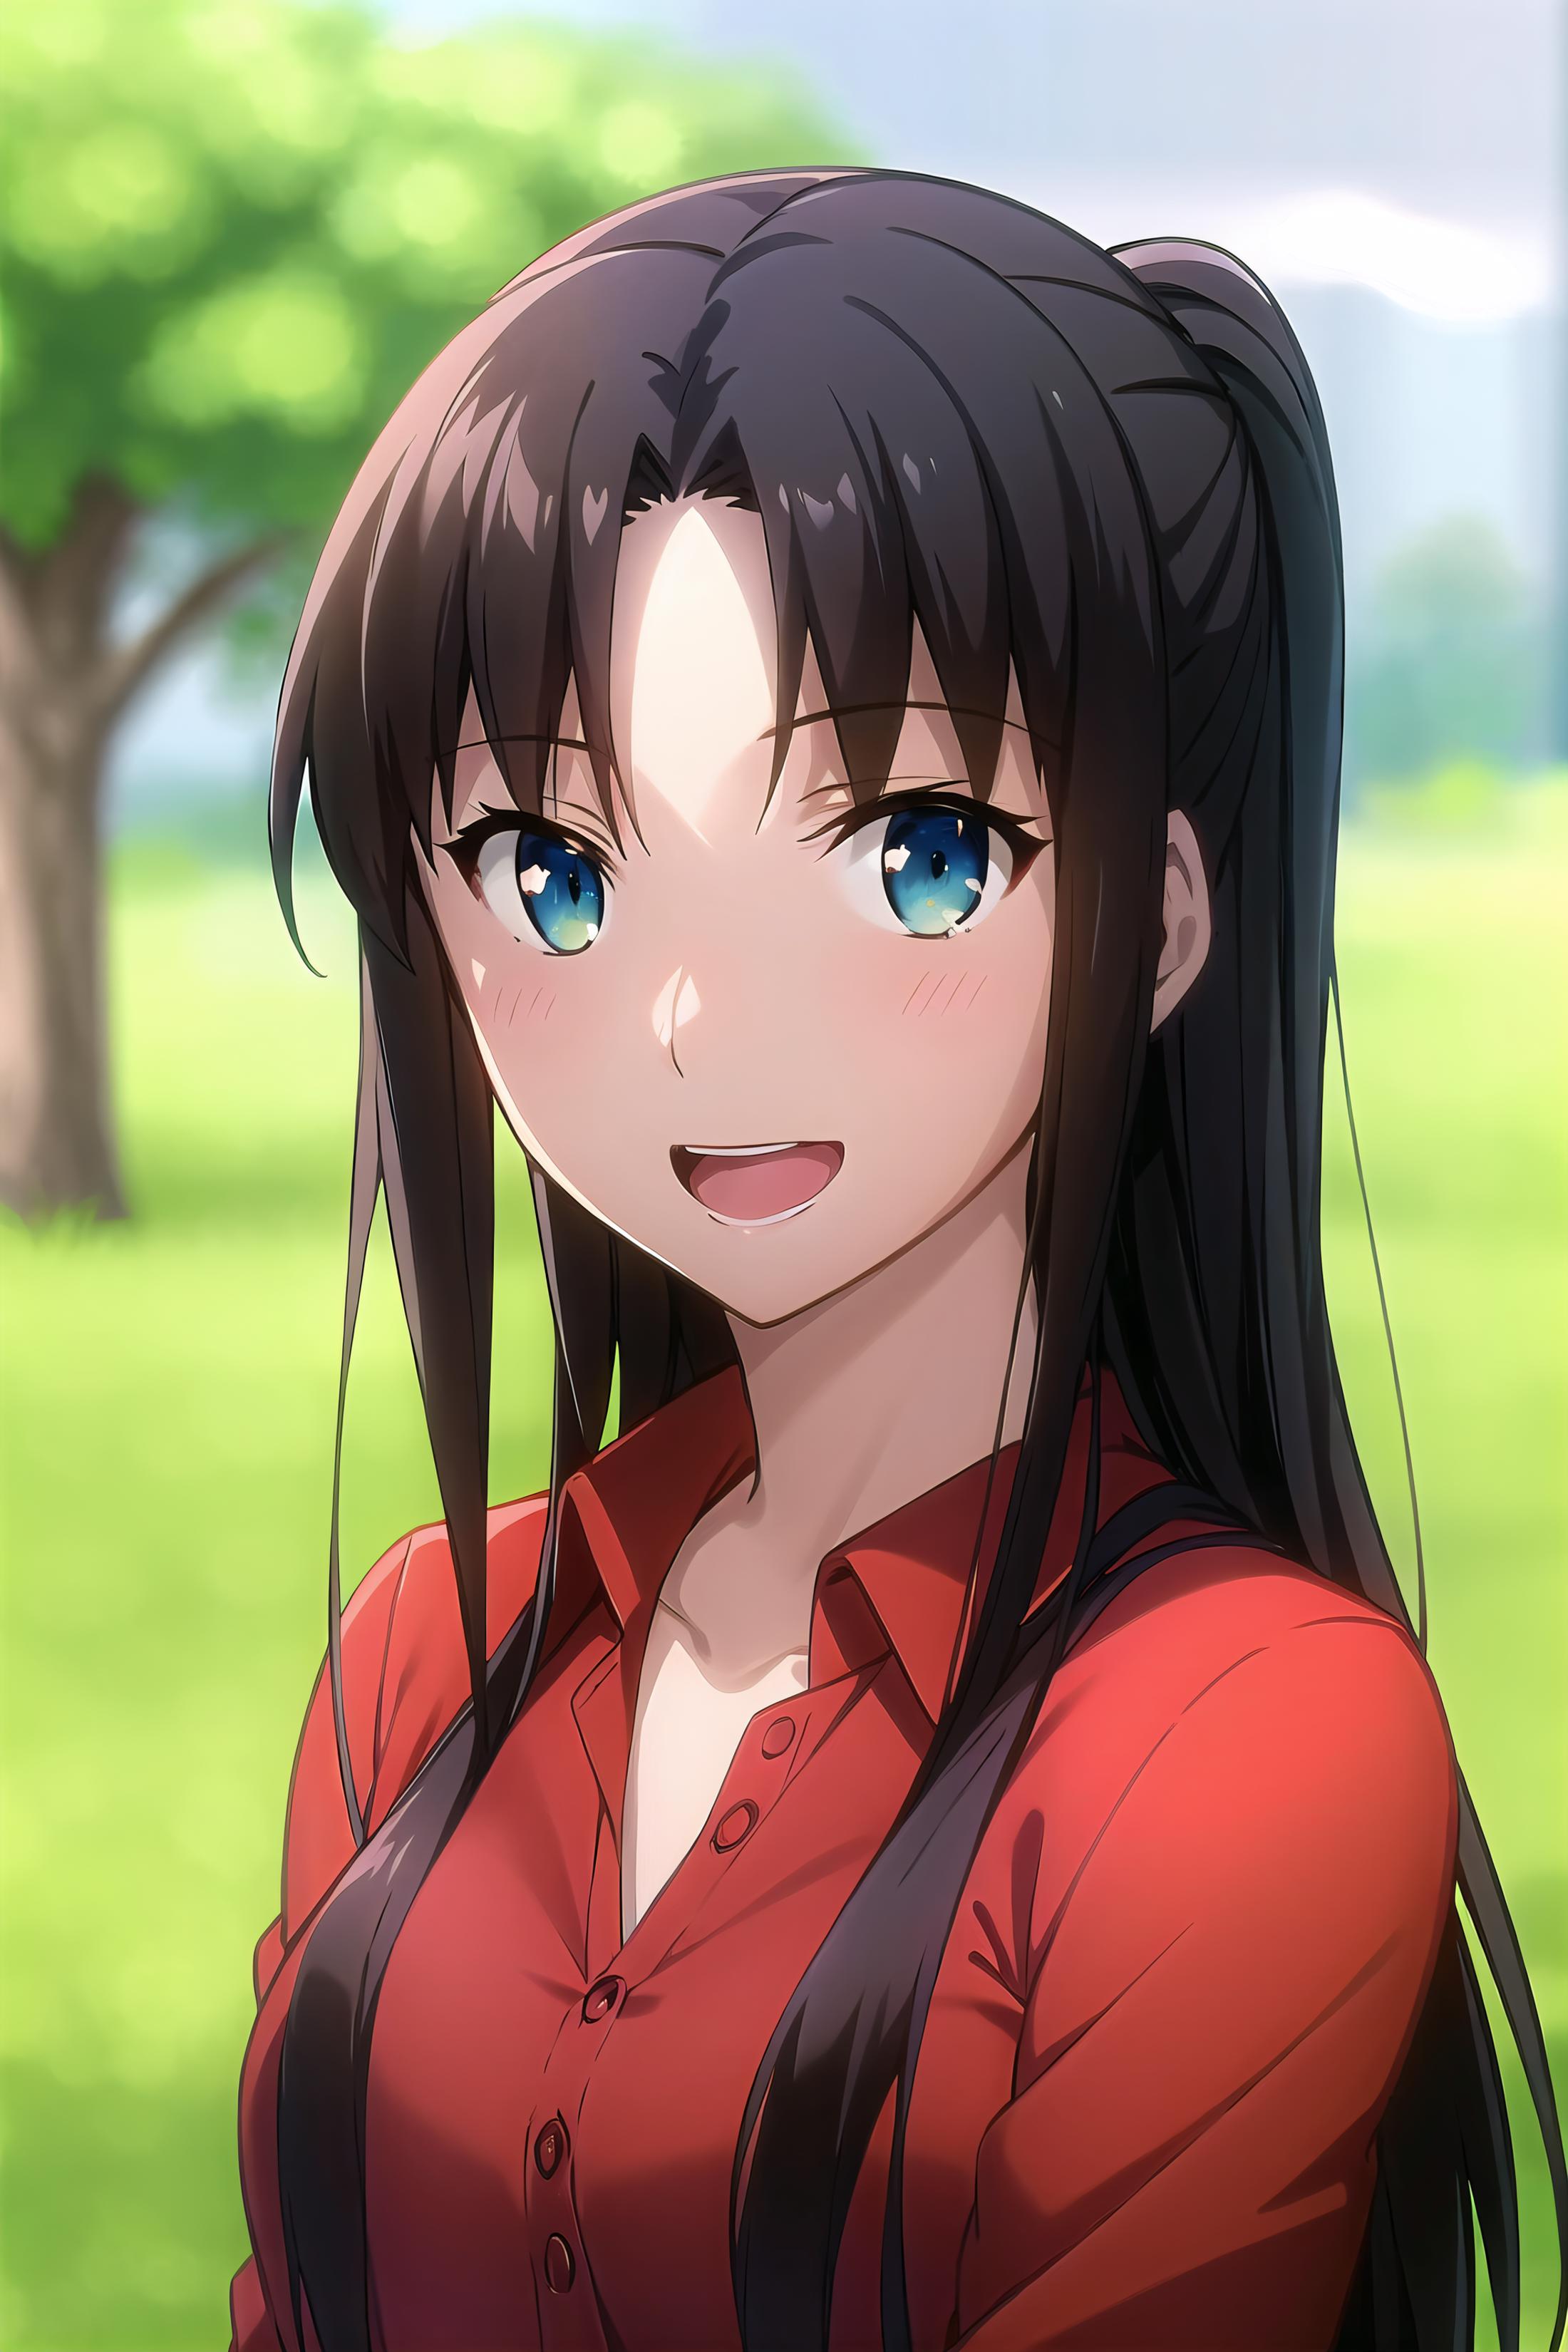 Tohsaka Rin (University ver.) | Fate/stay night: Unlimited Blade Works image by LittleJelly